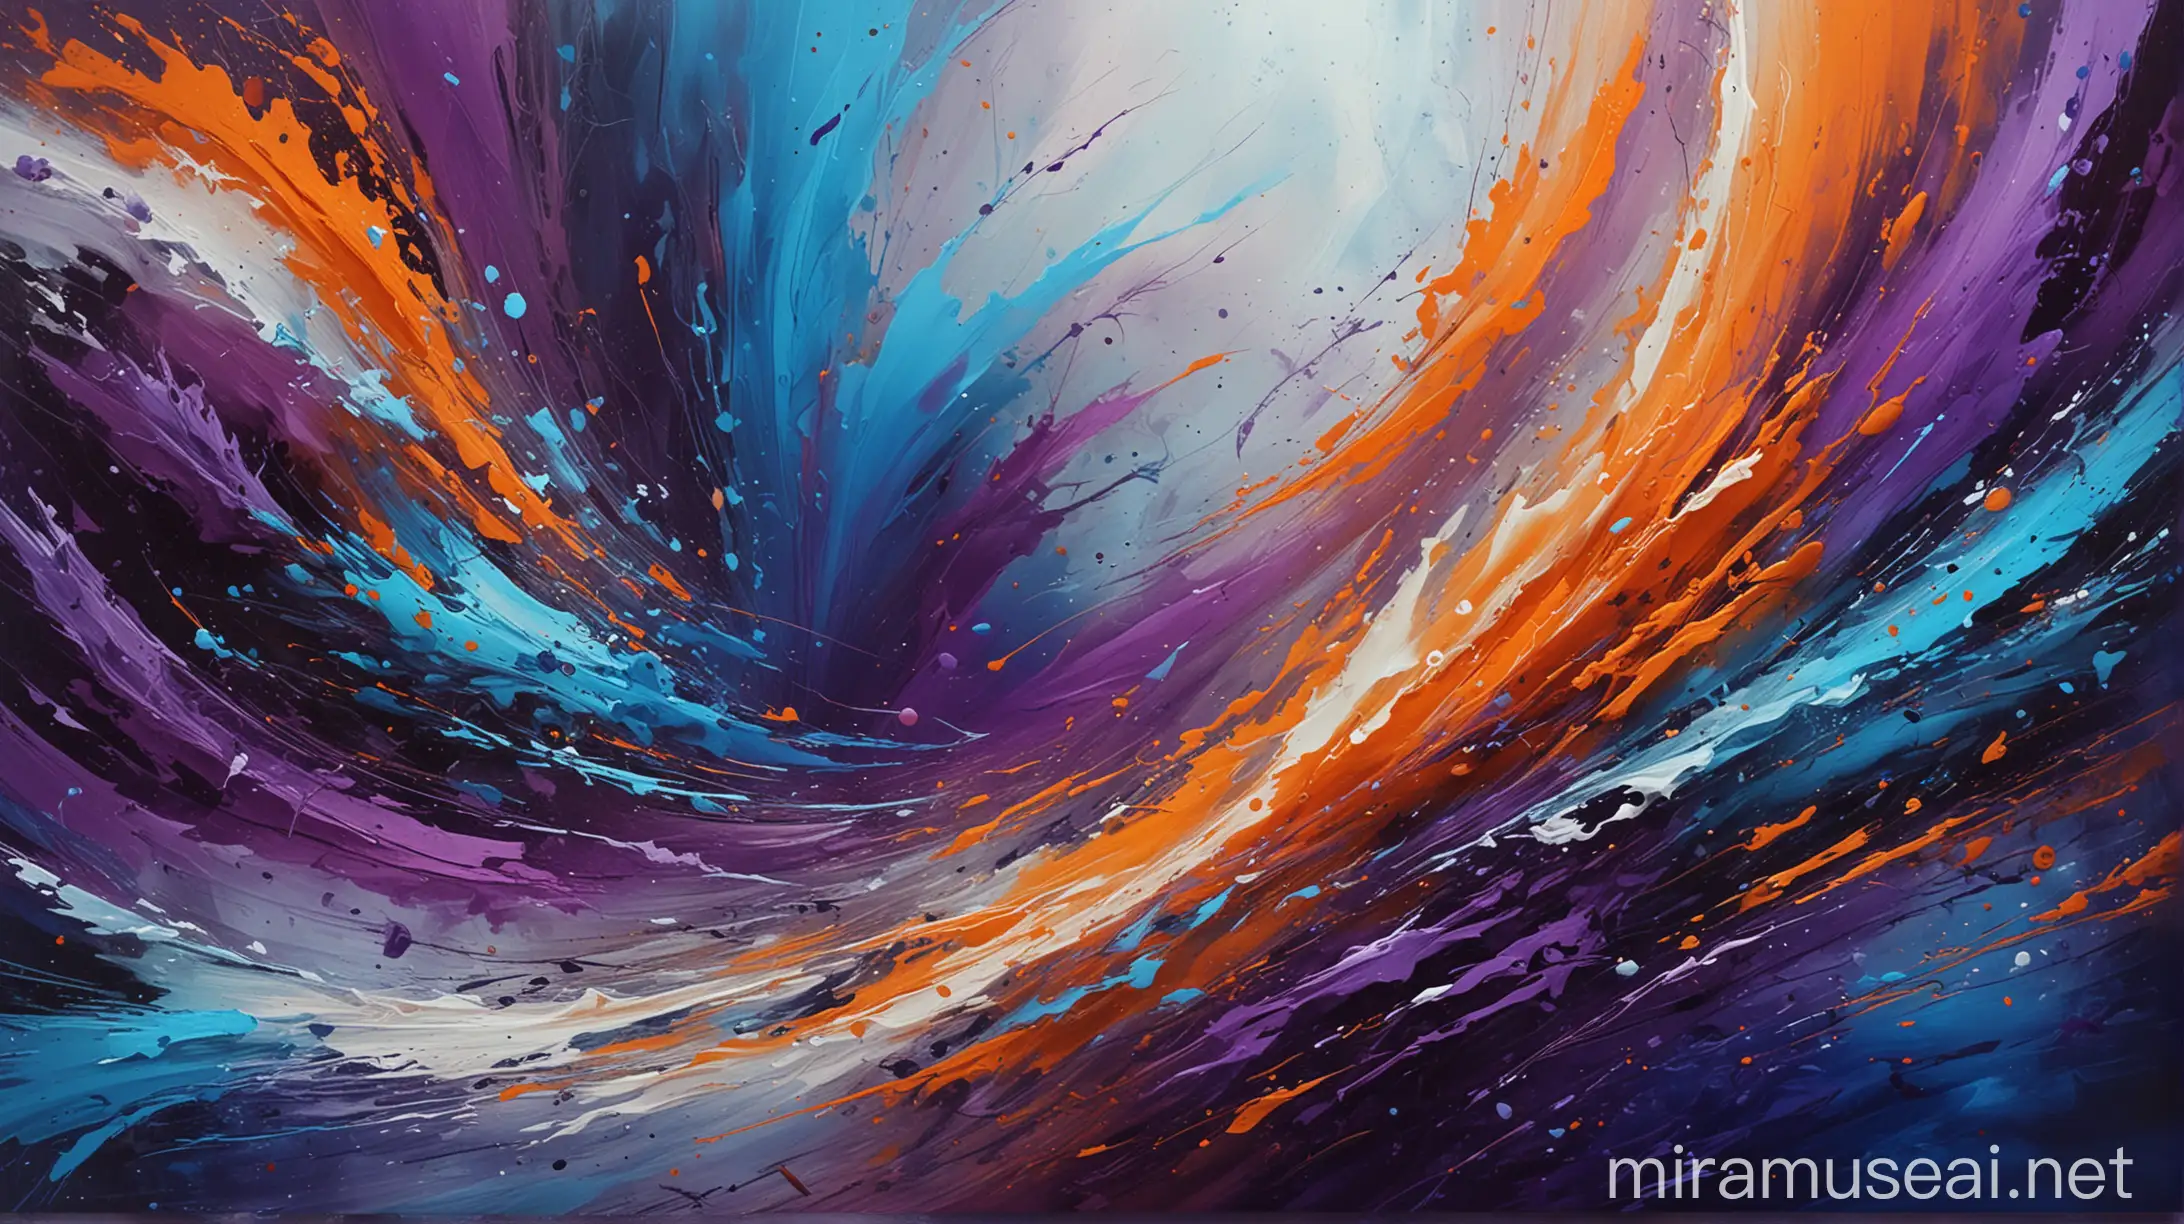 Dynamic Abstract Artwork in Blue Orange and Purple Tones